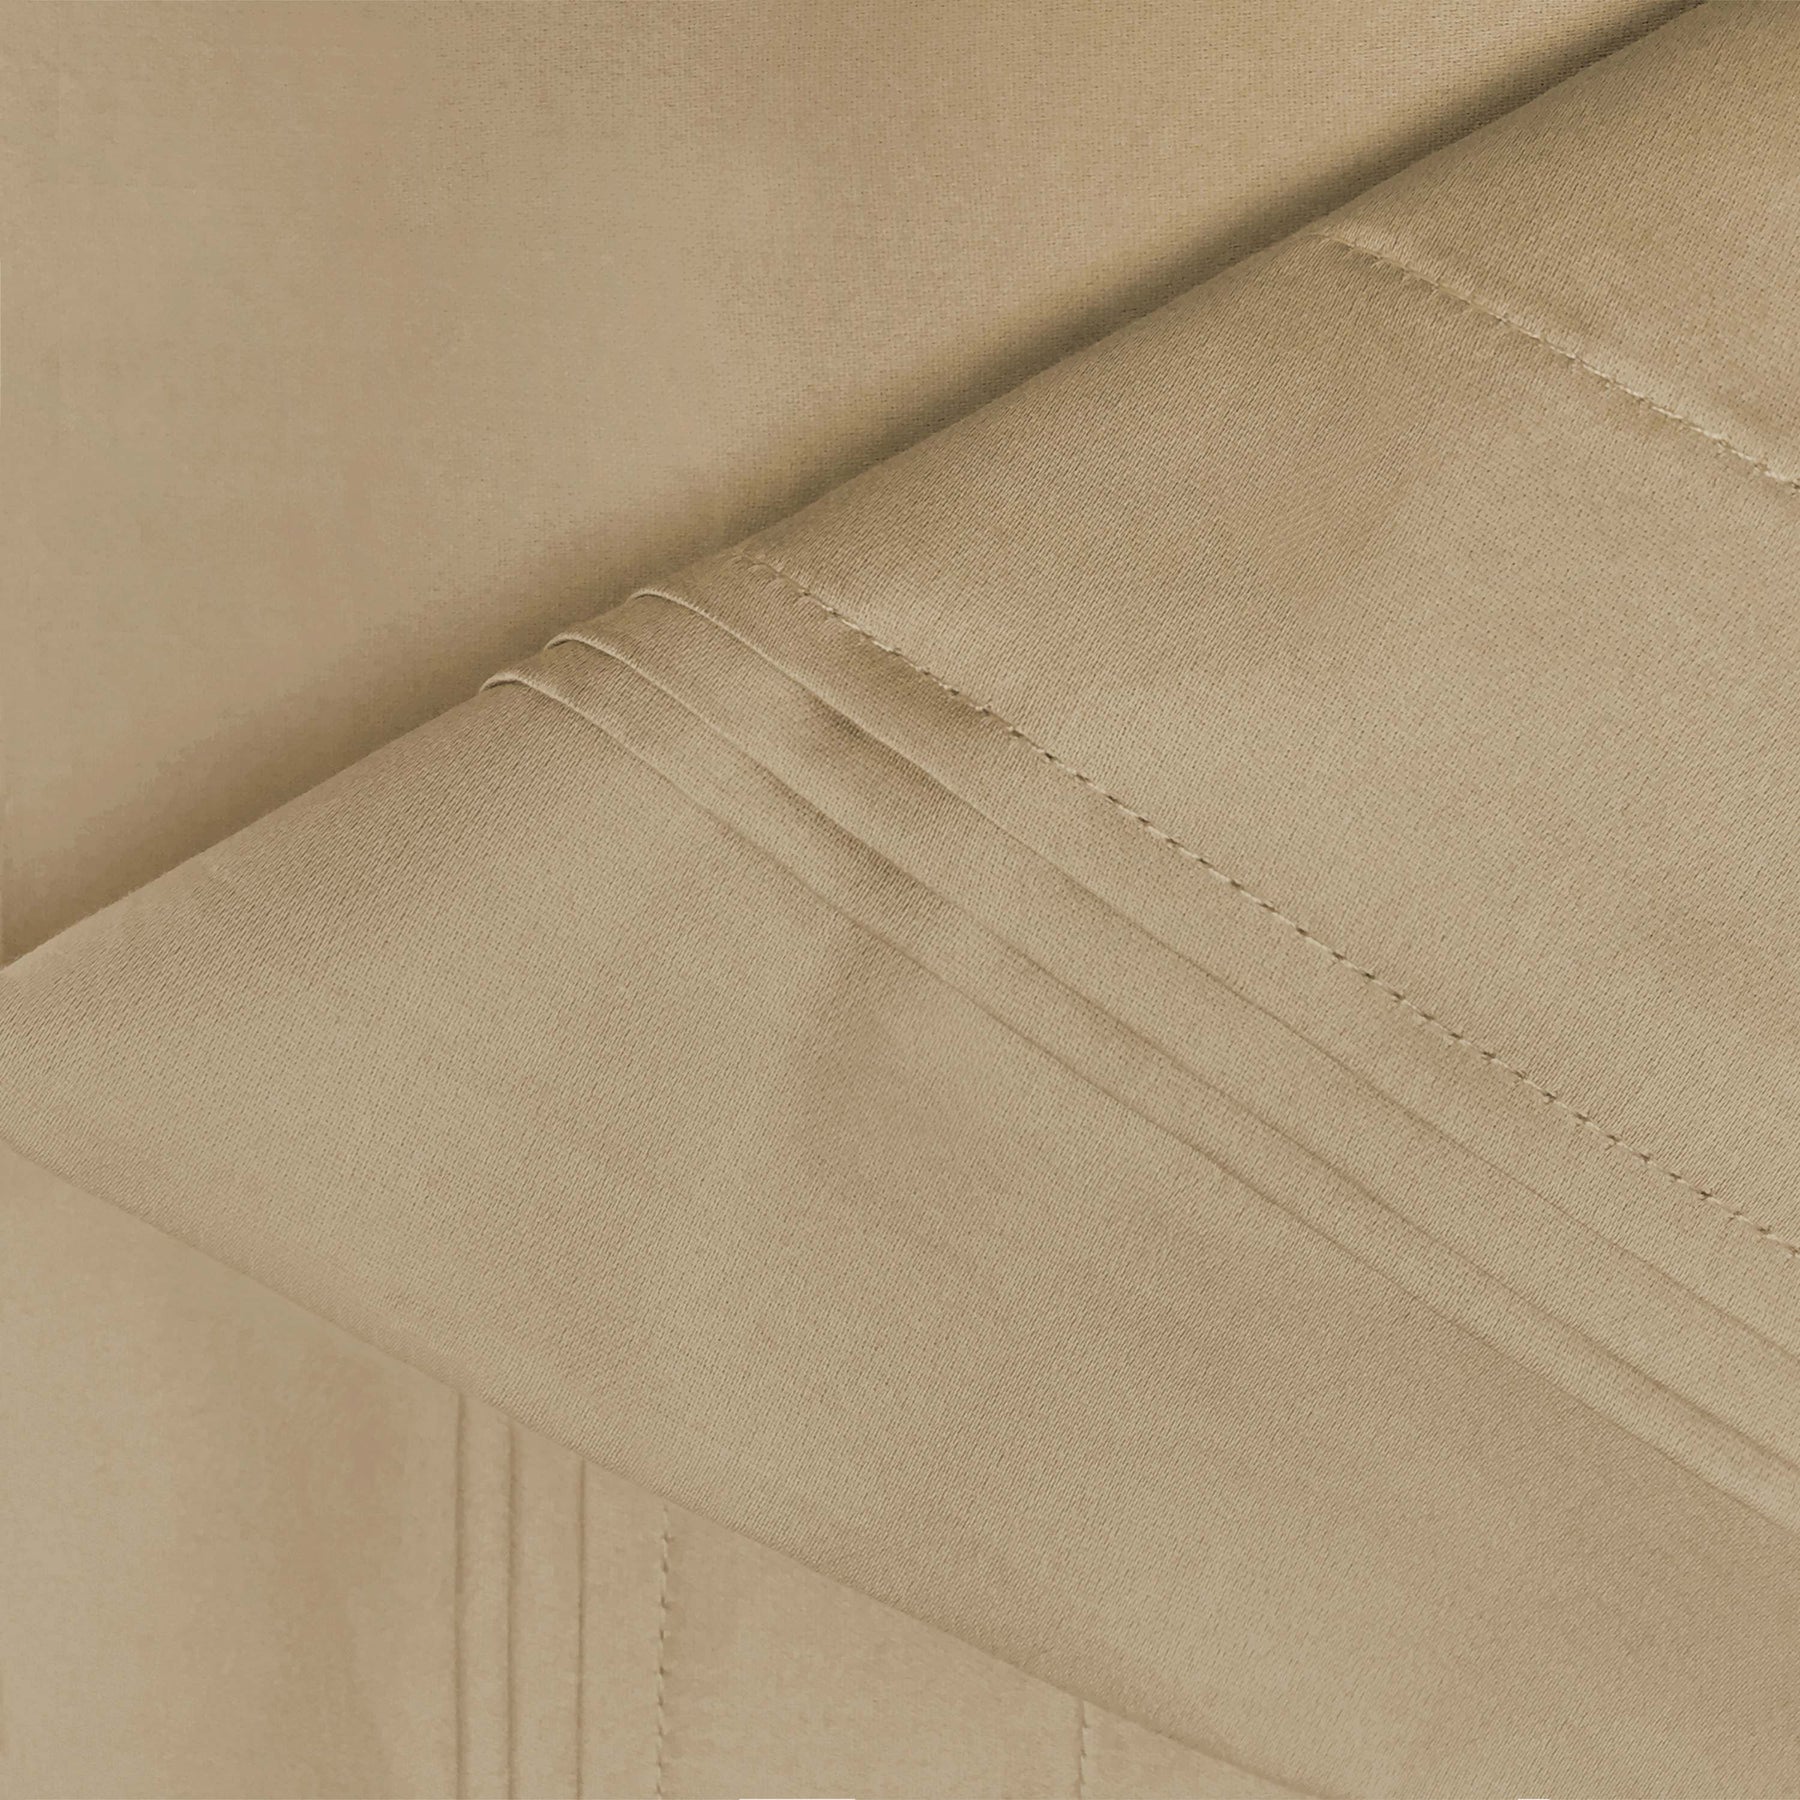 Egyptian Cotton 650 Thread Count Eco-Friendly Solid Sheet Set - Linen